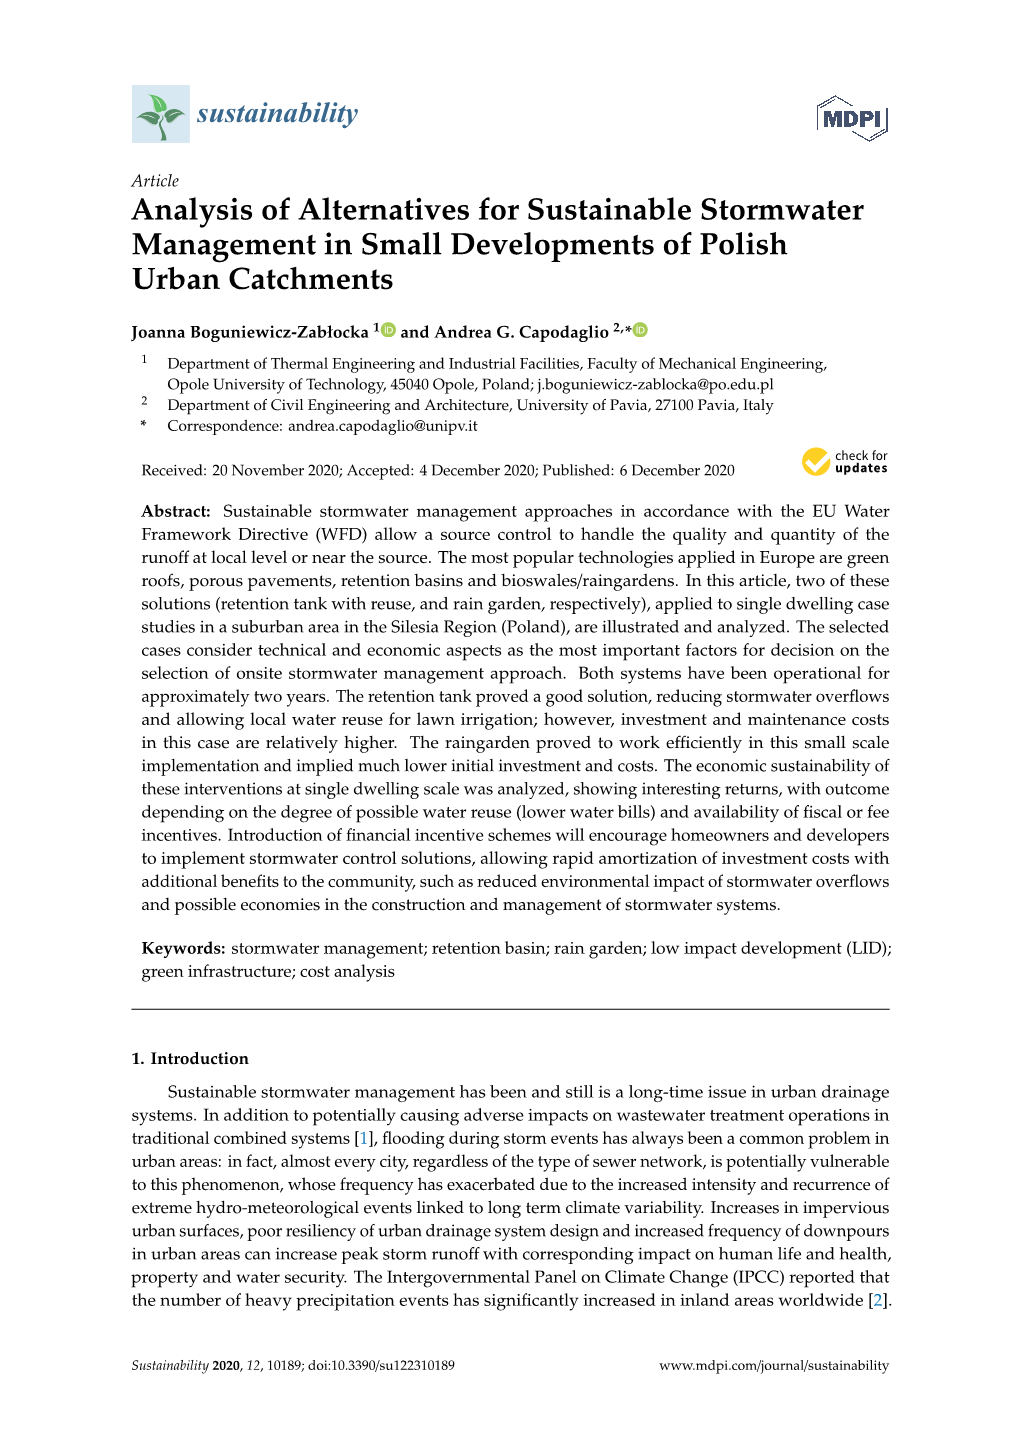 Analysis of Alternatives for Sustainable Stormwater Management in Small Developments of Polish Urban Catchments